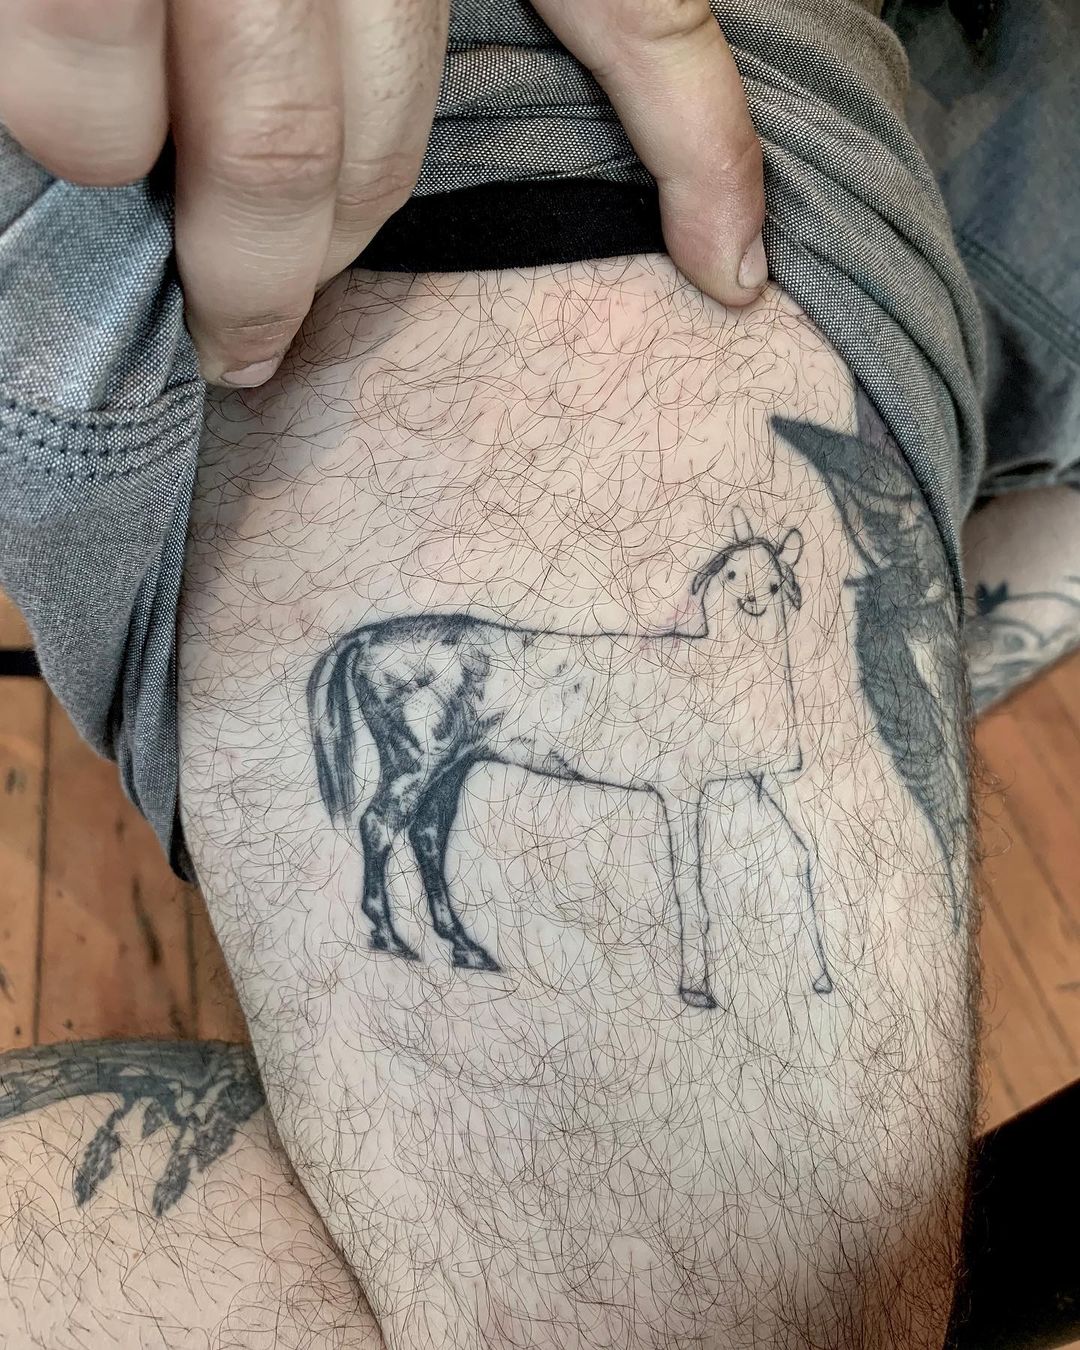 25 meme tattoos that extremely online people got irl